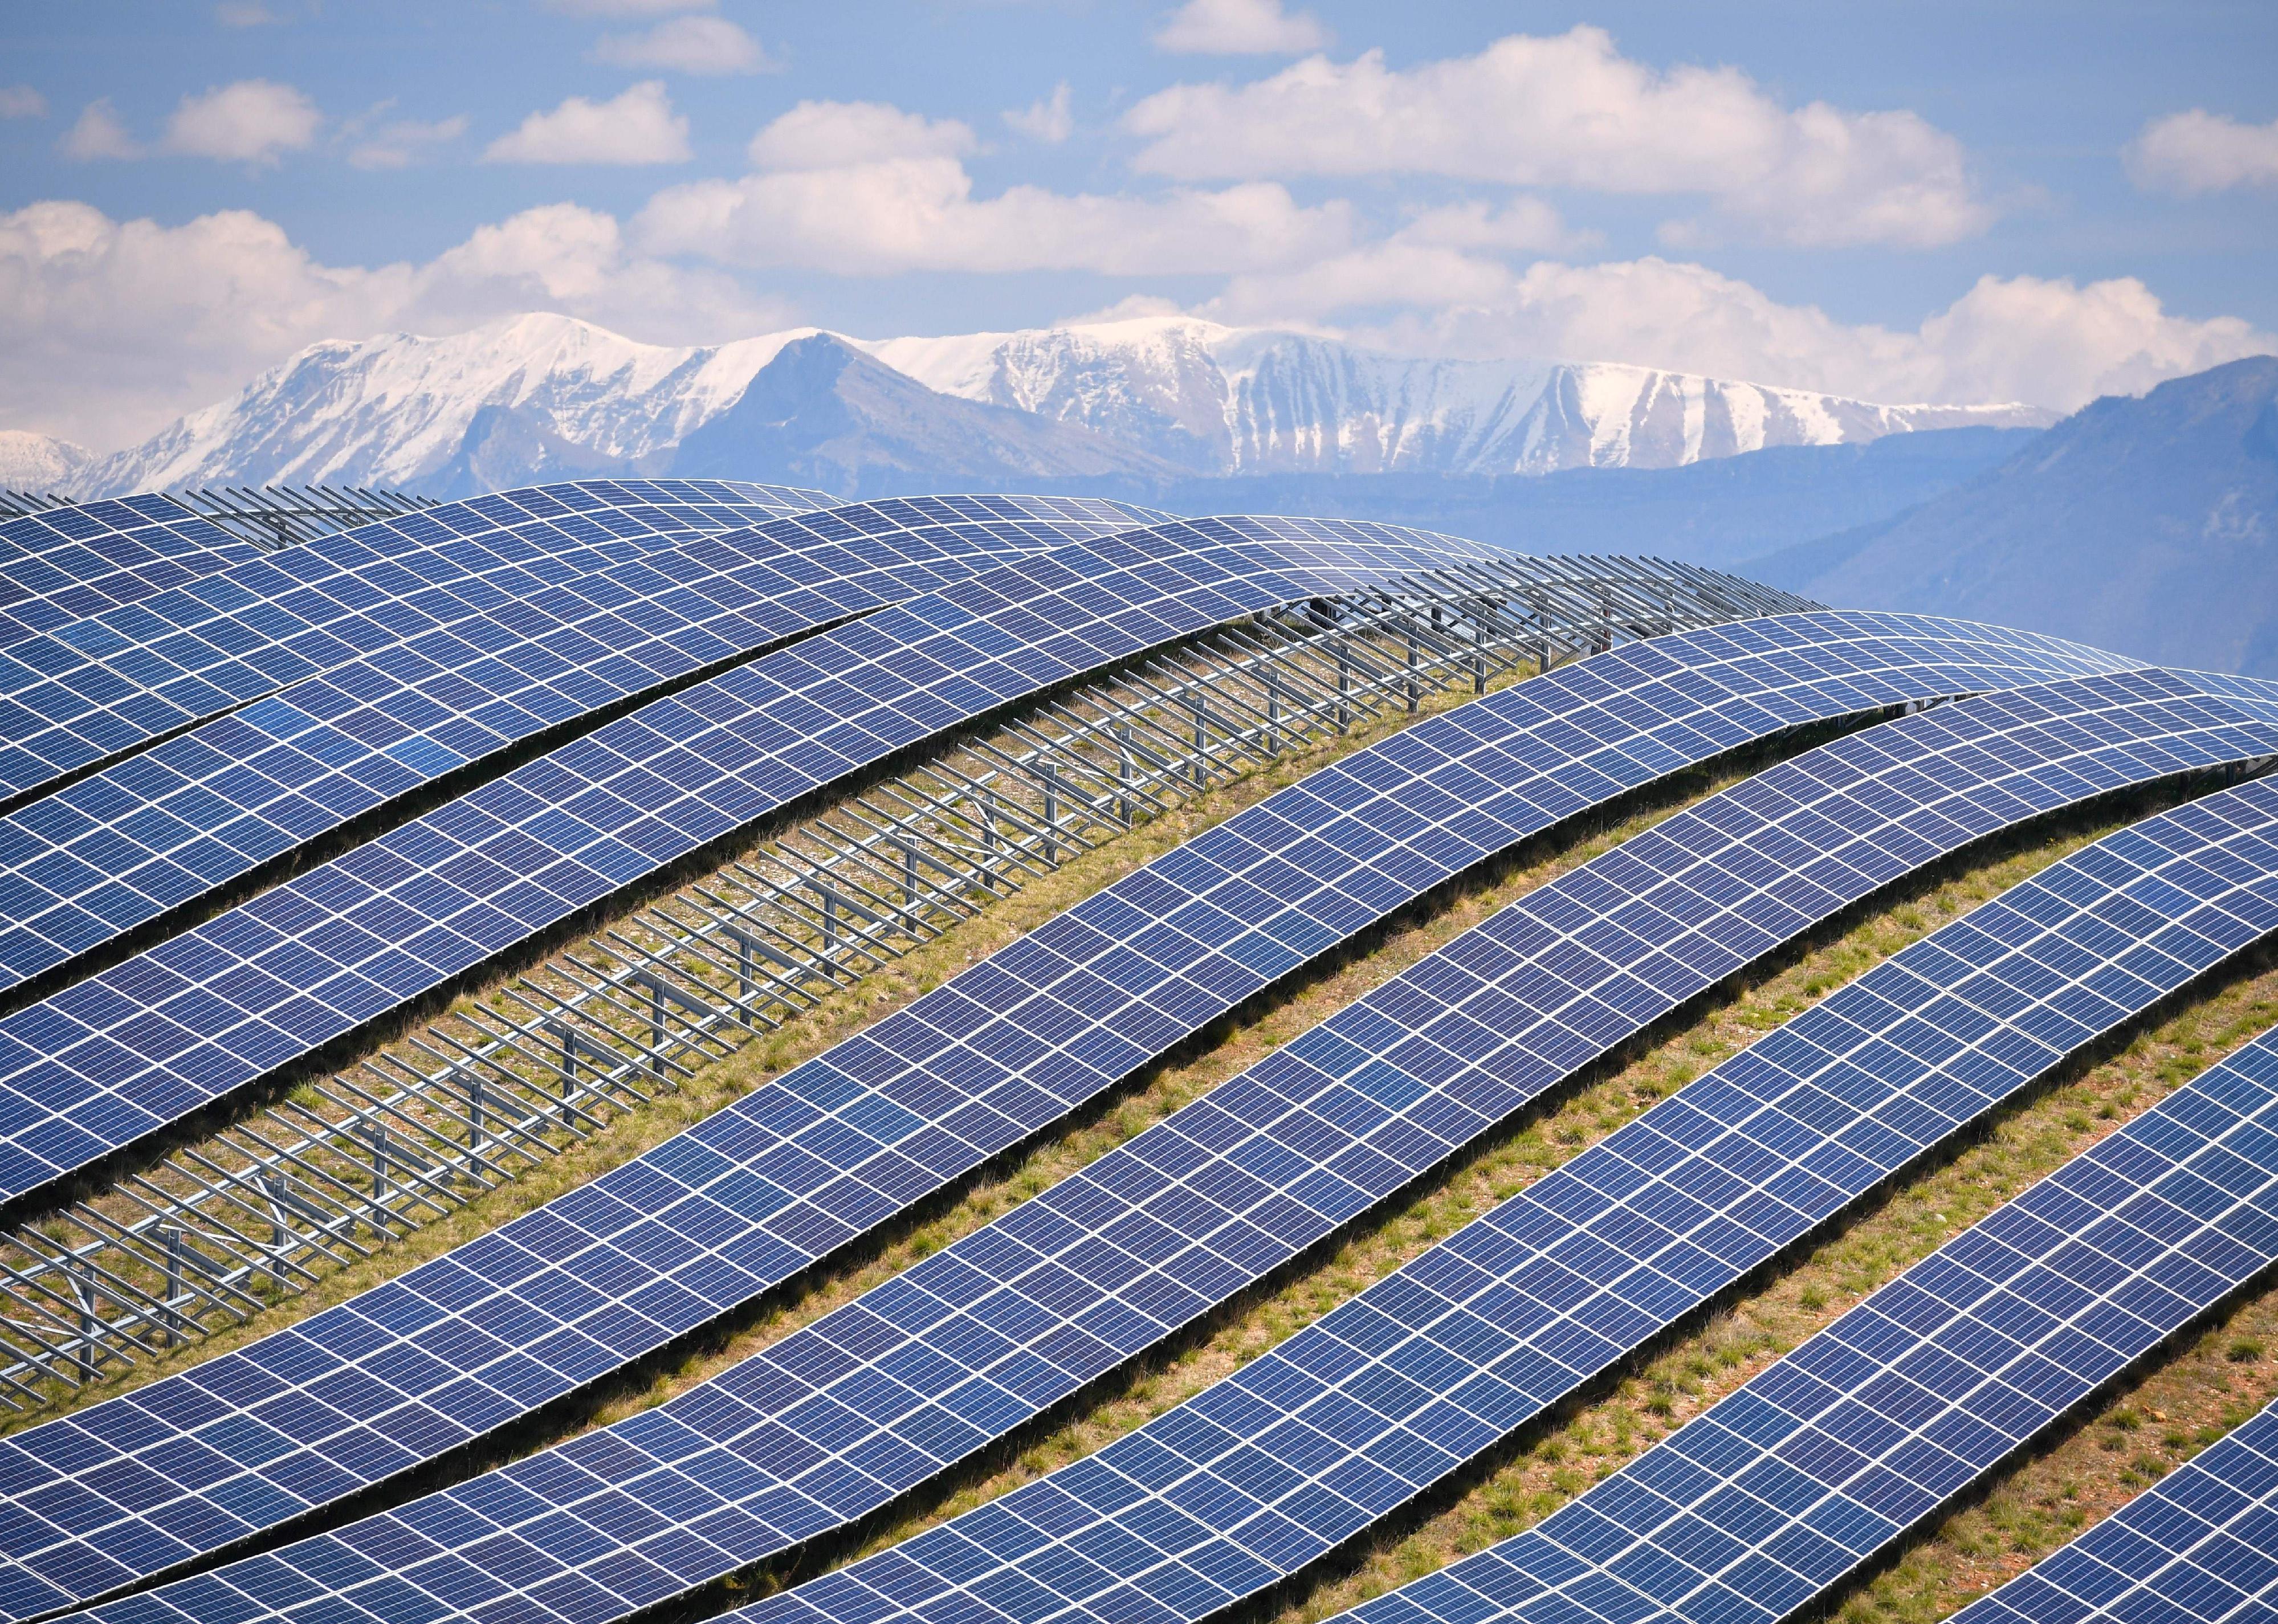 Hills lined with solar panels with the snowy Alps in the background.